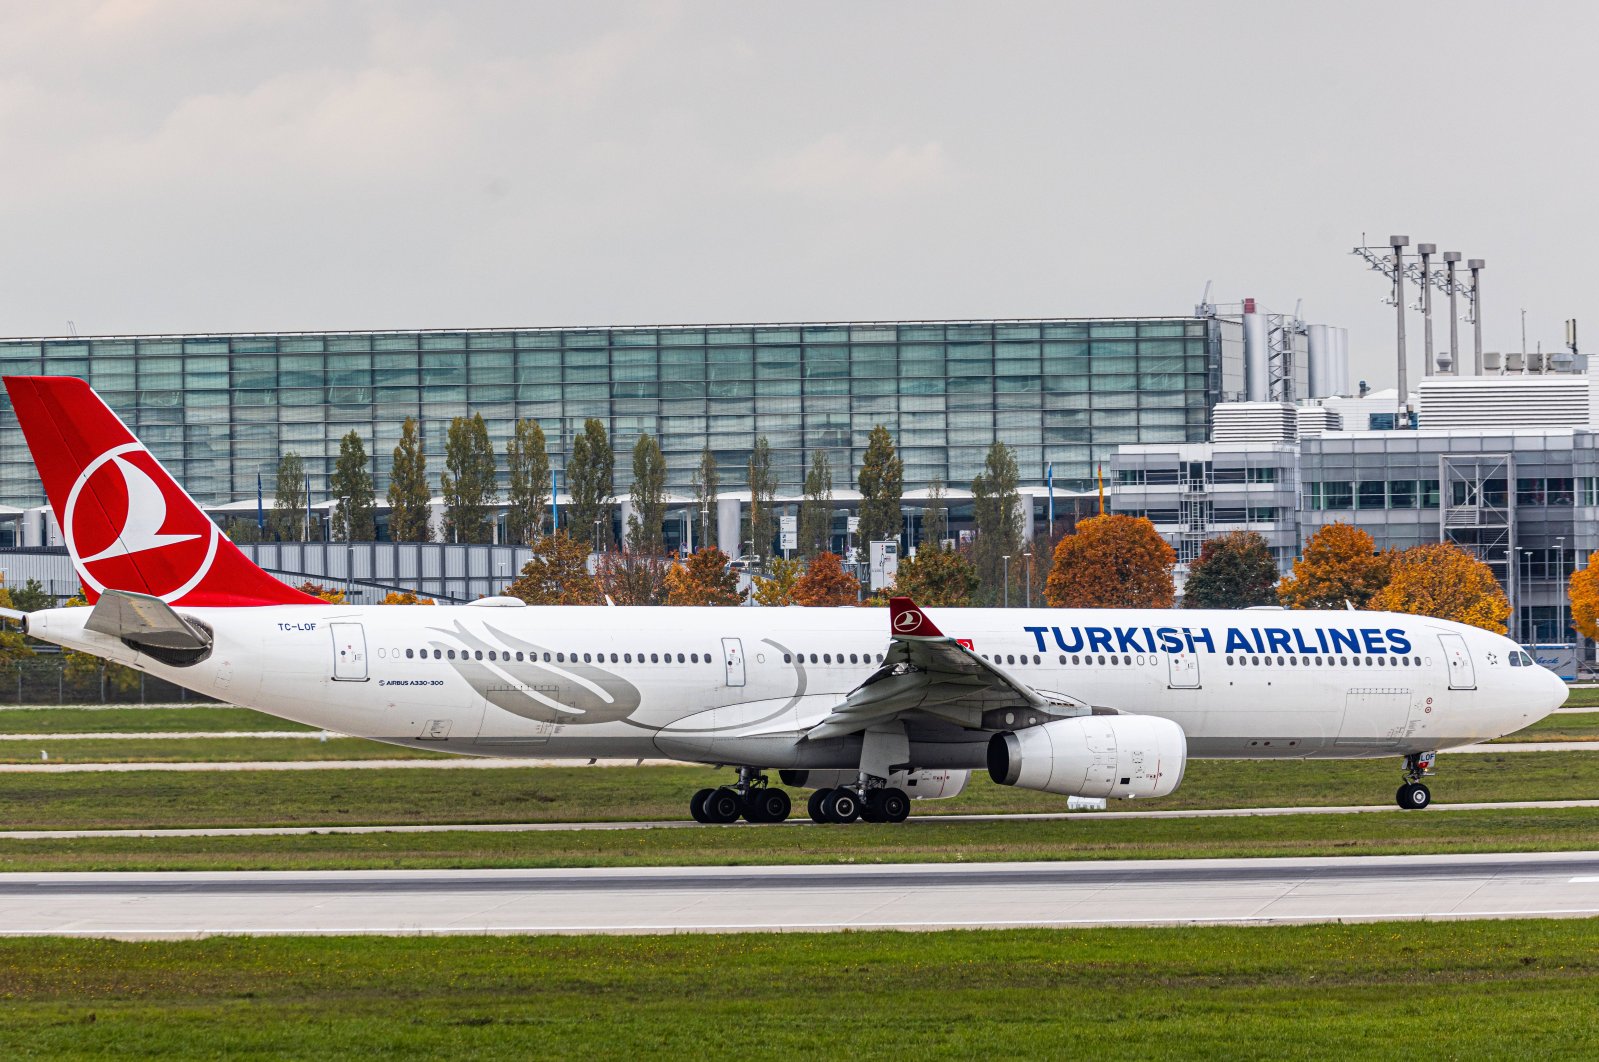 Turkish Airlines aircraft lands at the airport in Munich, Germany, Oct. 10, 2022. (Reuters Photo)